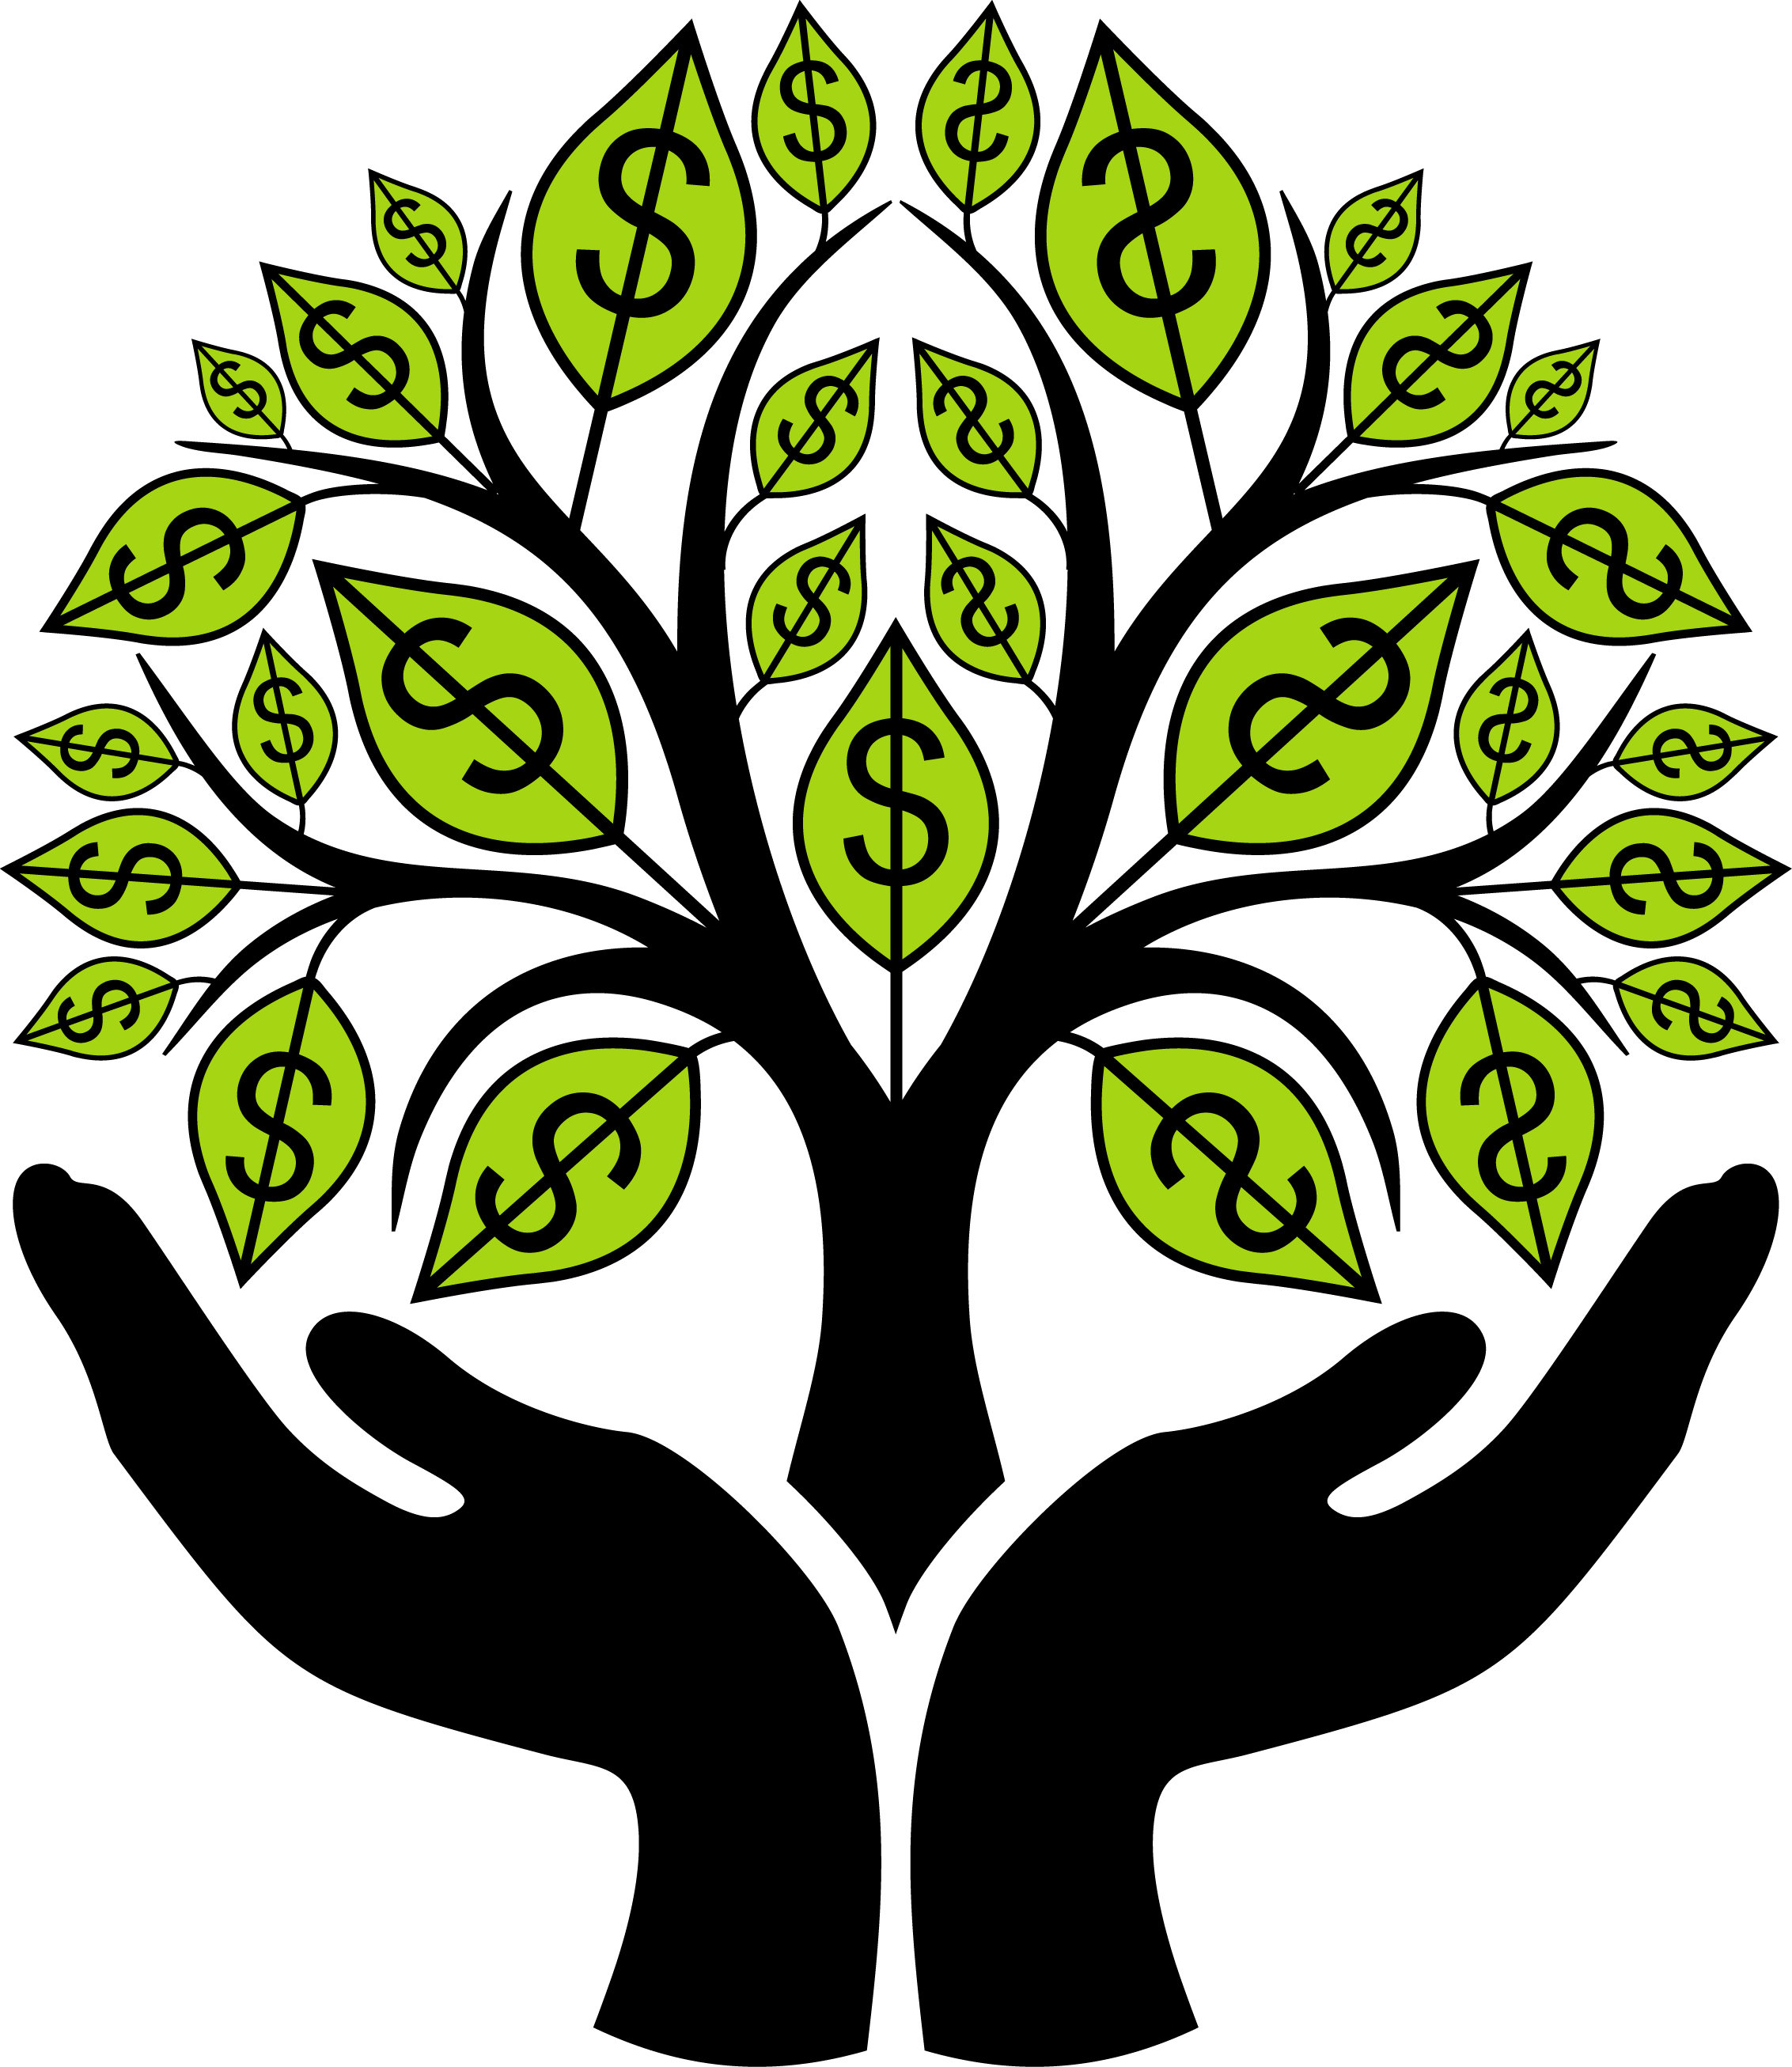 money clipart free download - photo #48